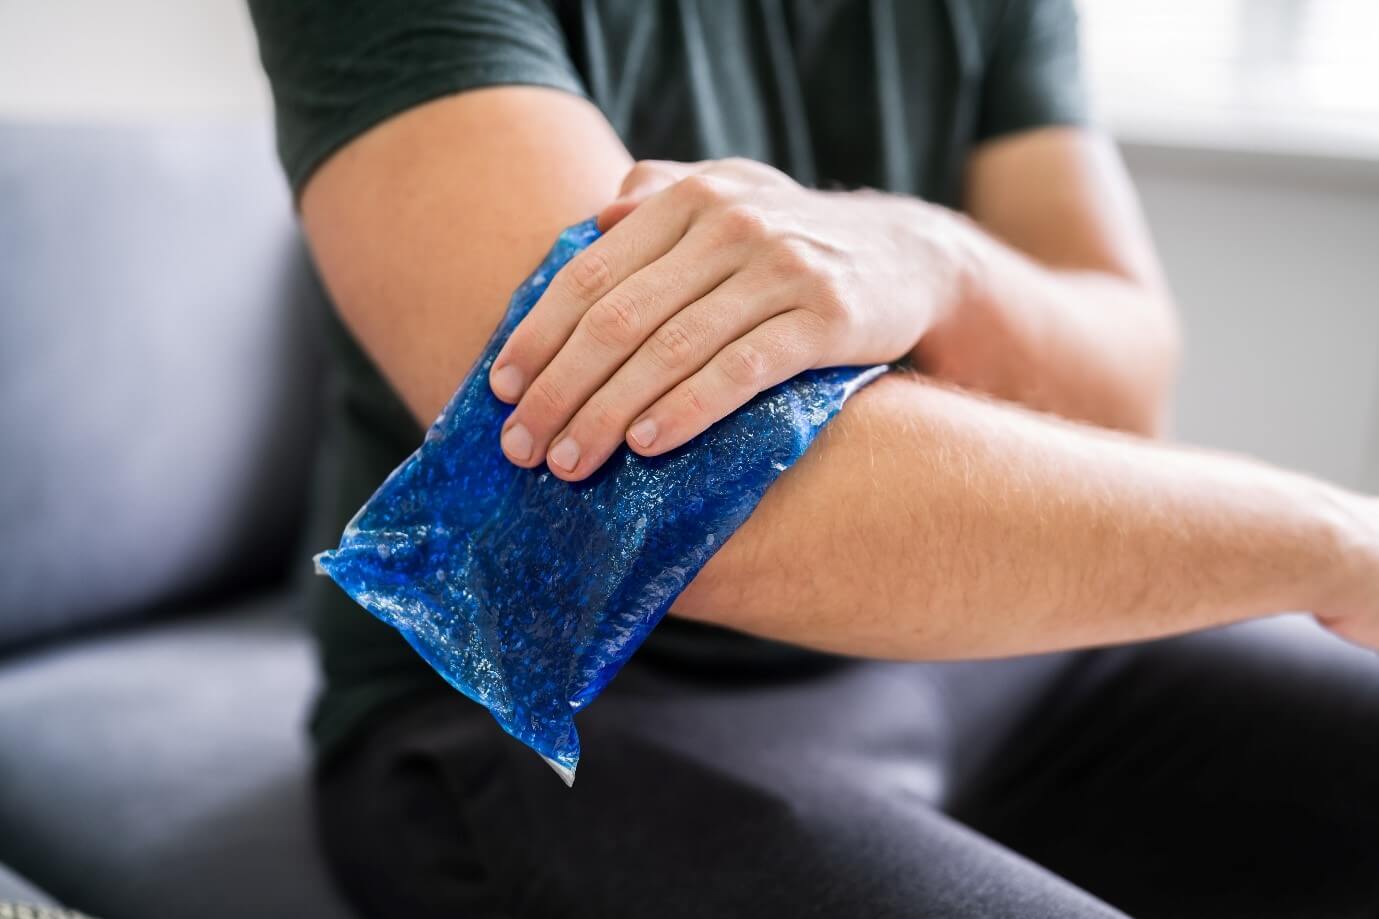 How to Use an Ice Pack with Injuries - Physioroom Blog